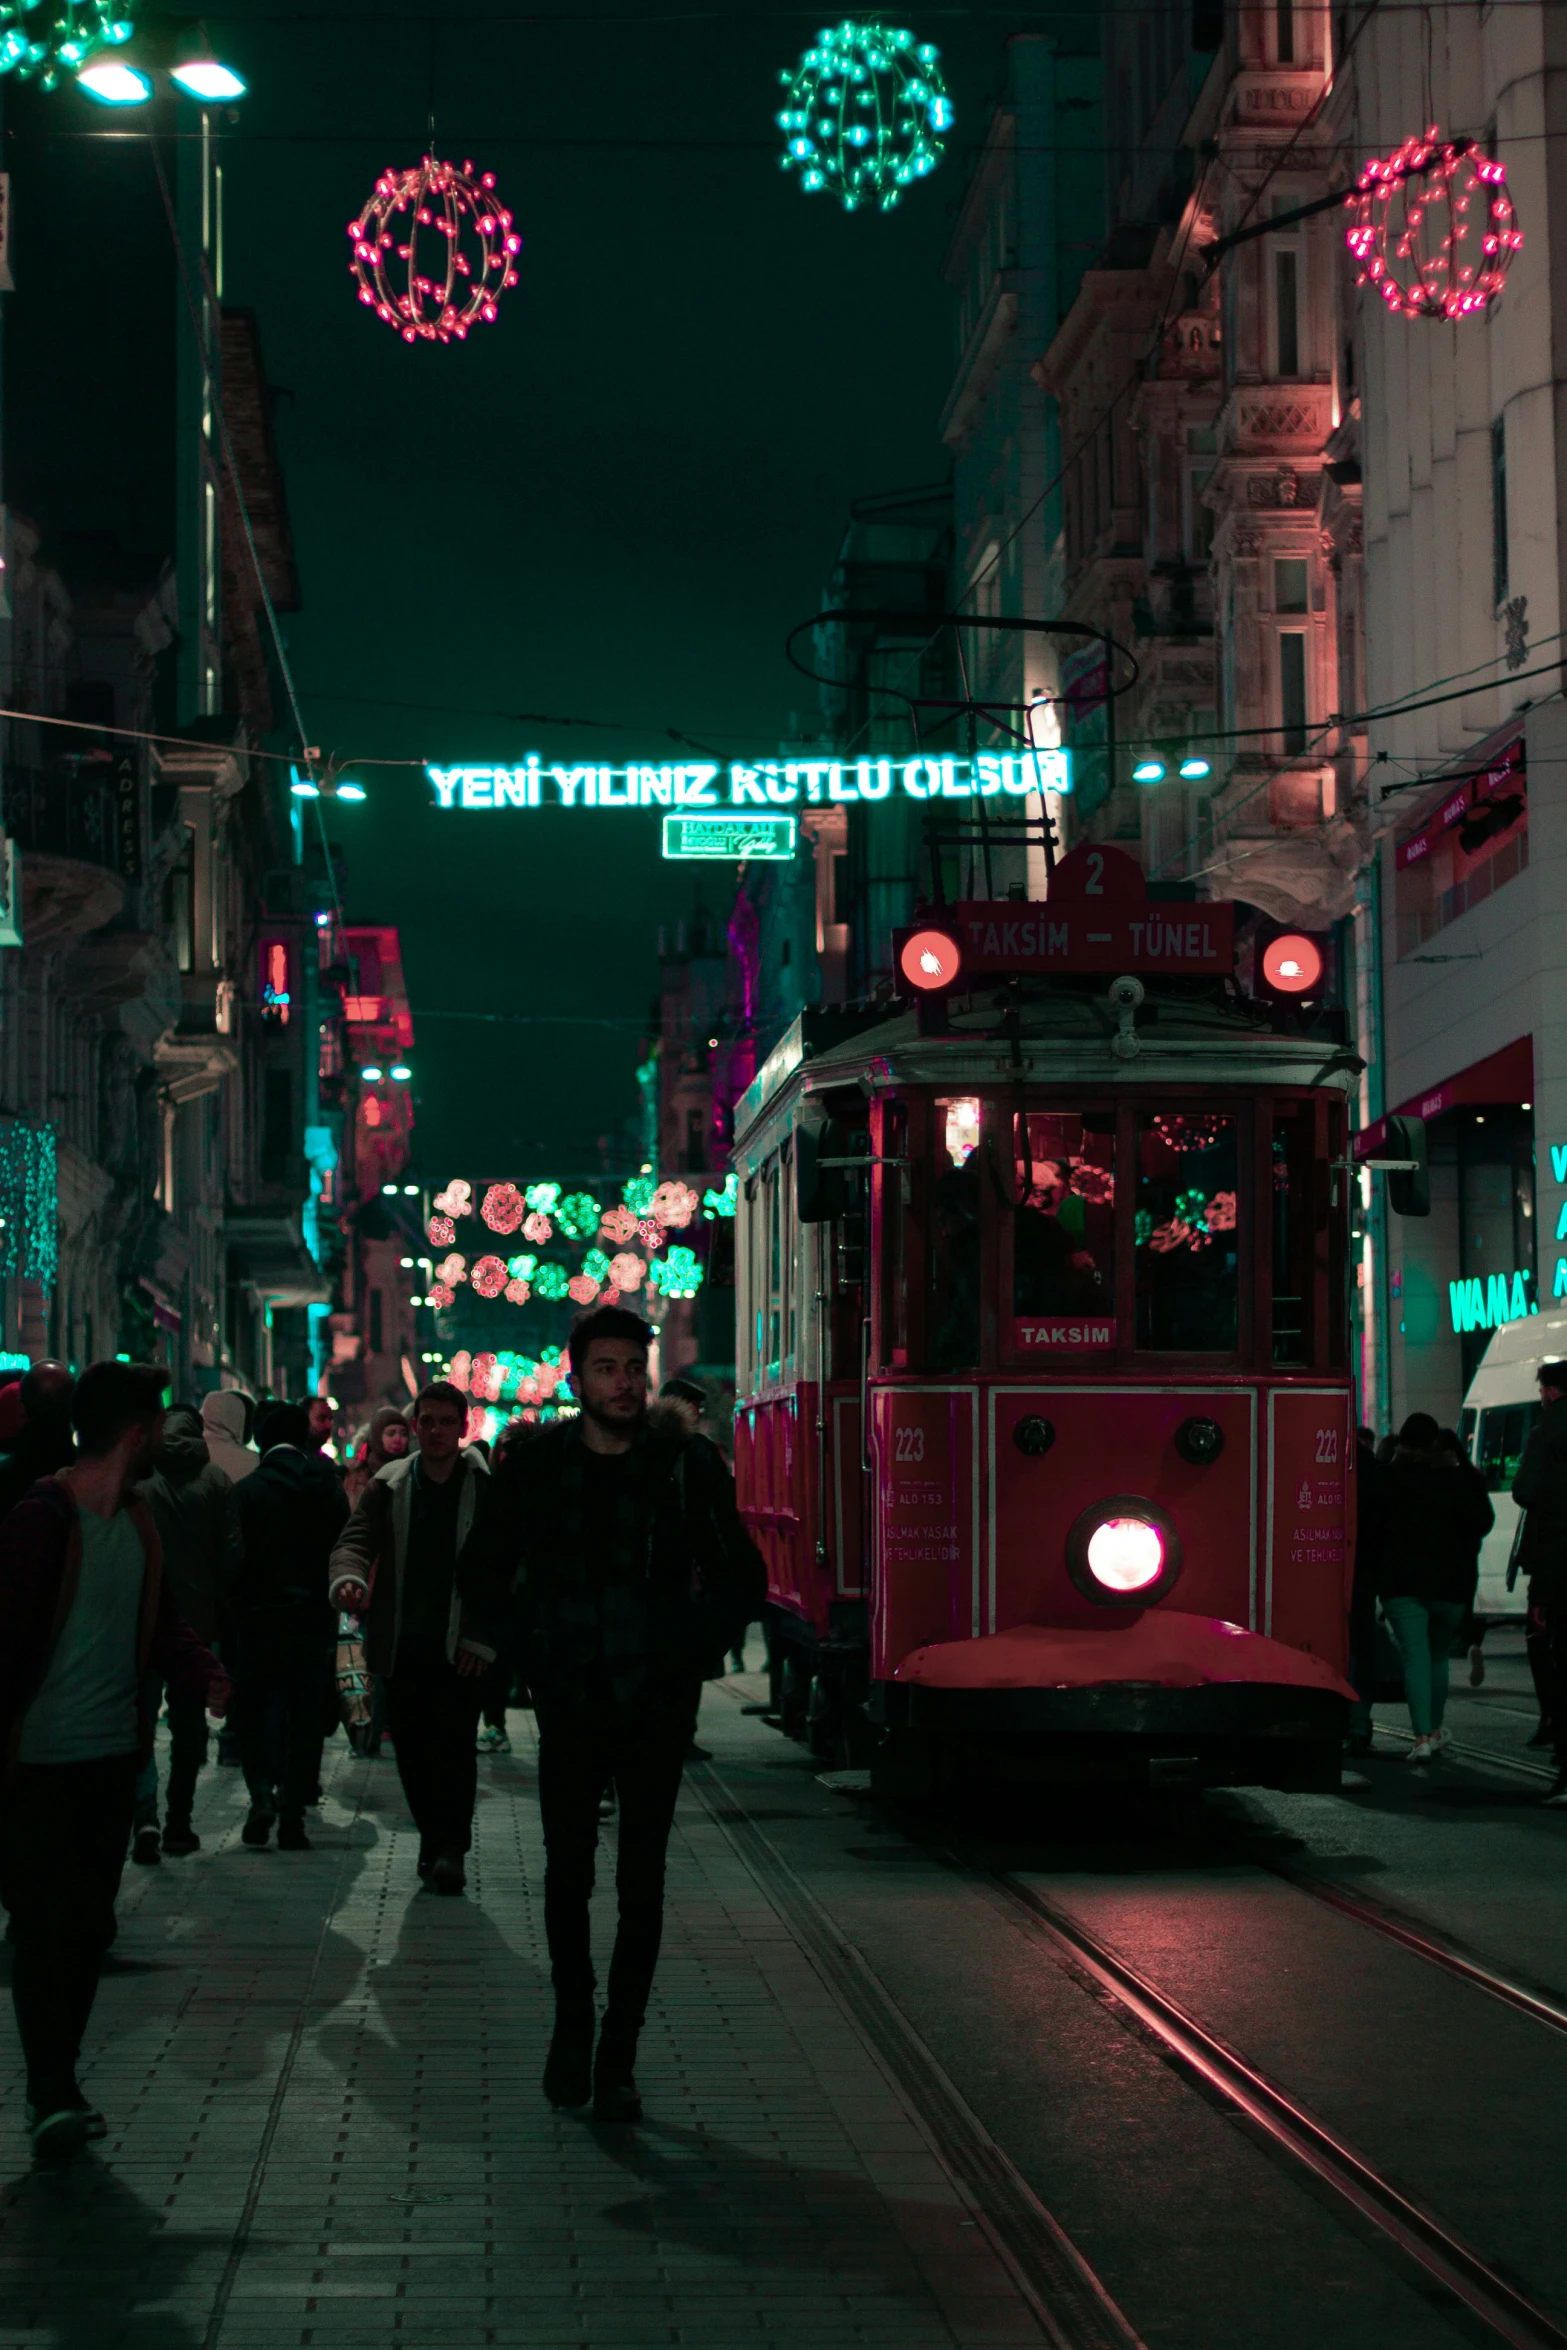 a tram passing down a city street at night